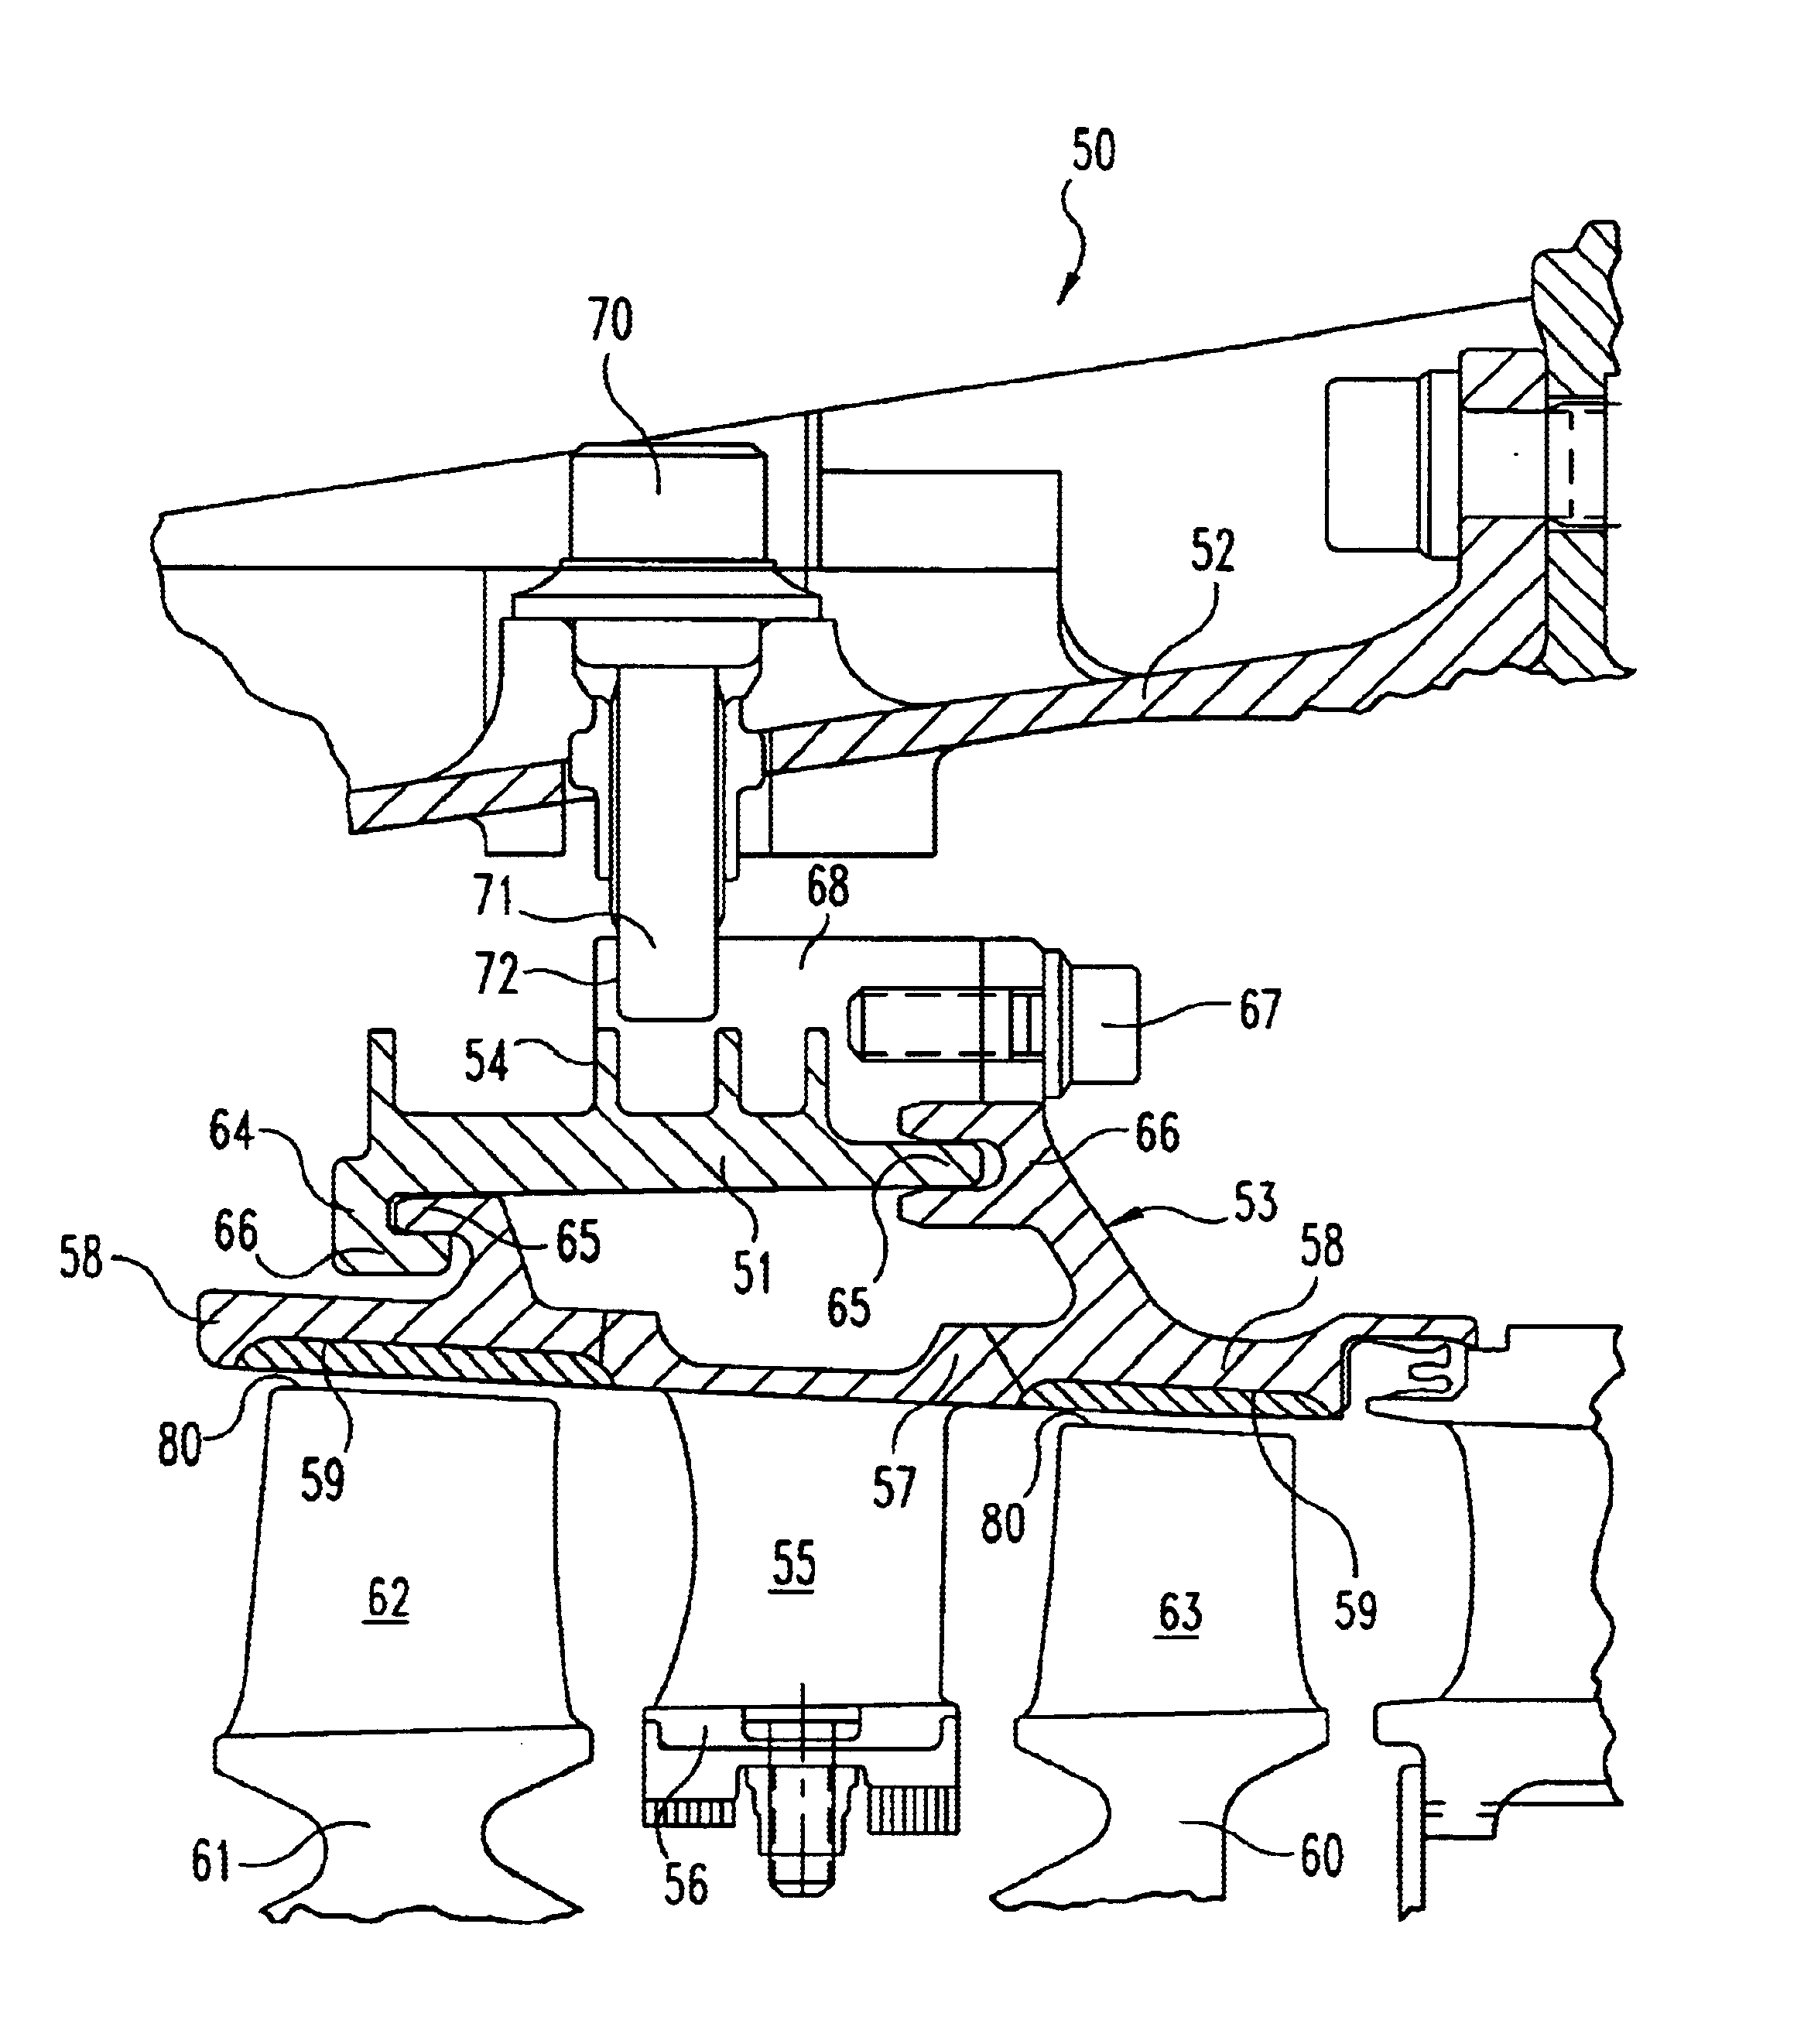 Compressor casing with passive tip clearance control and endwall ovalization control